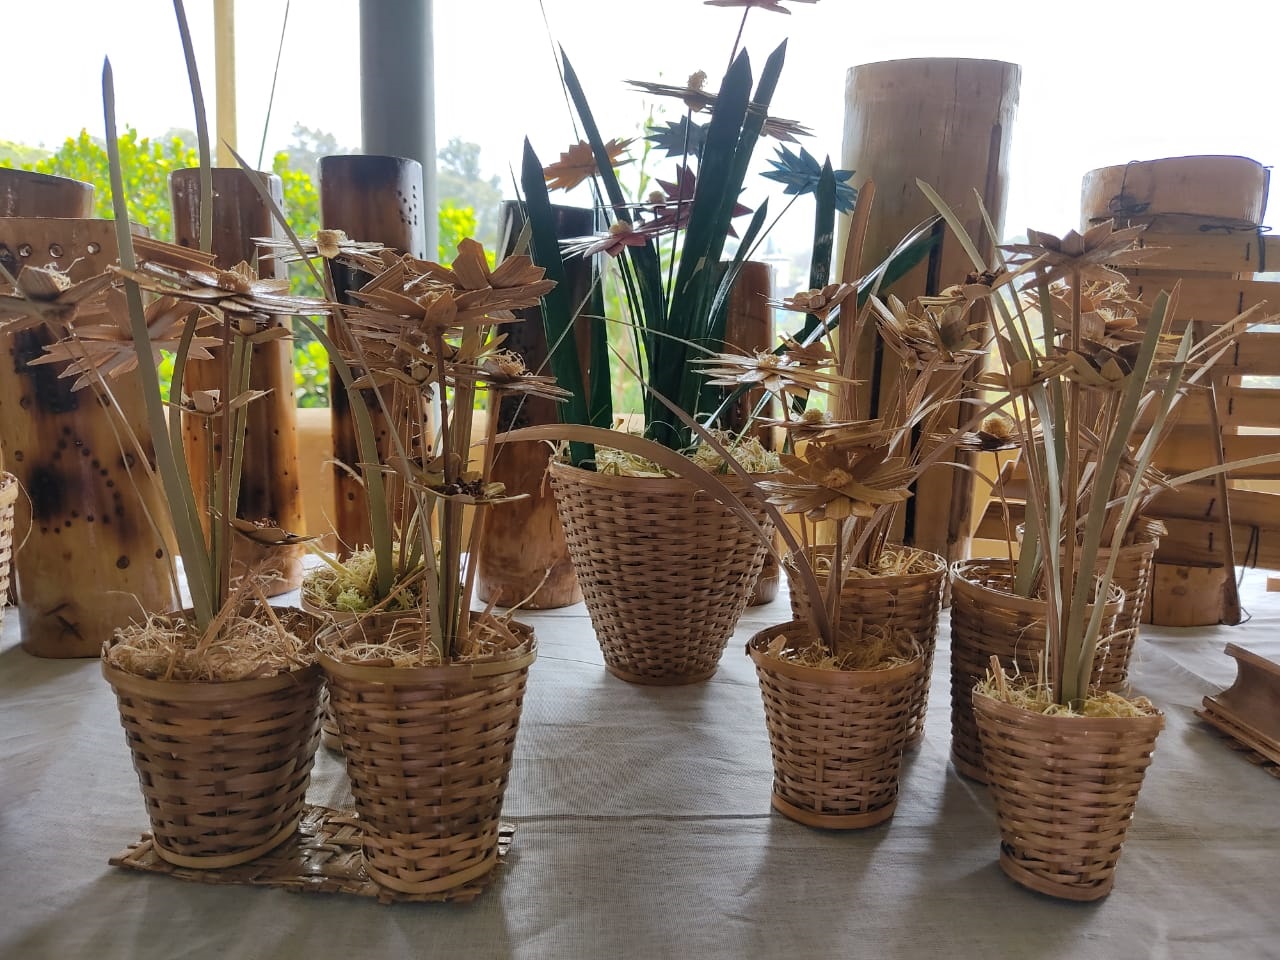 Bamboo Flower pots made by Trainees